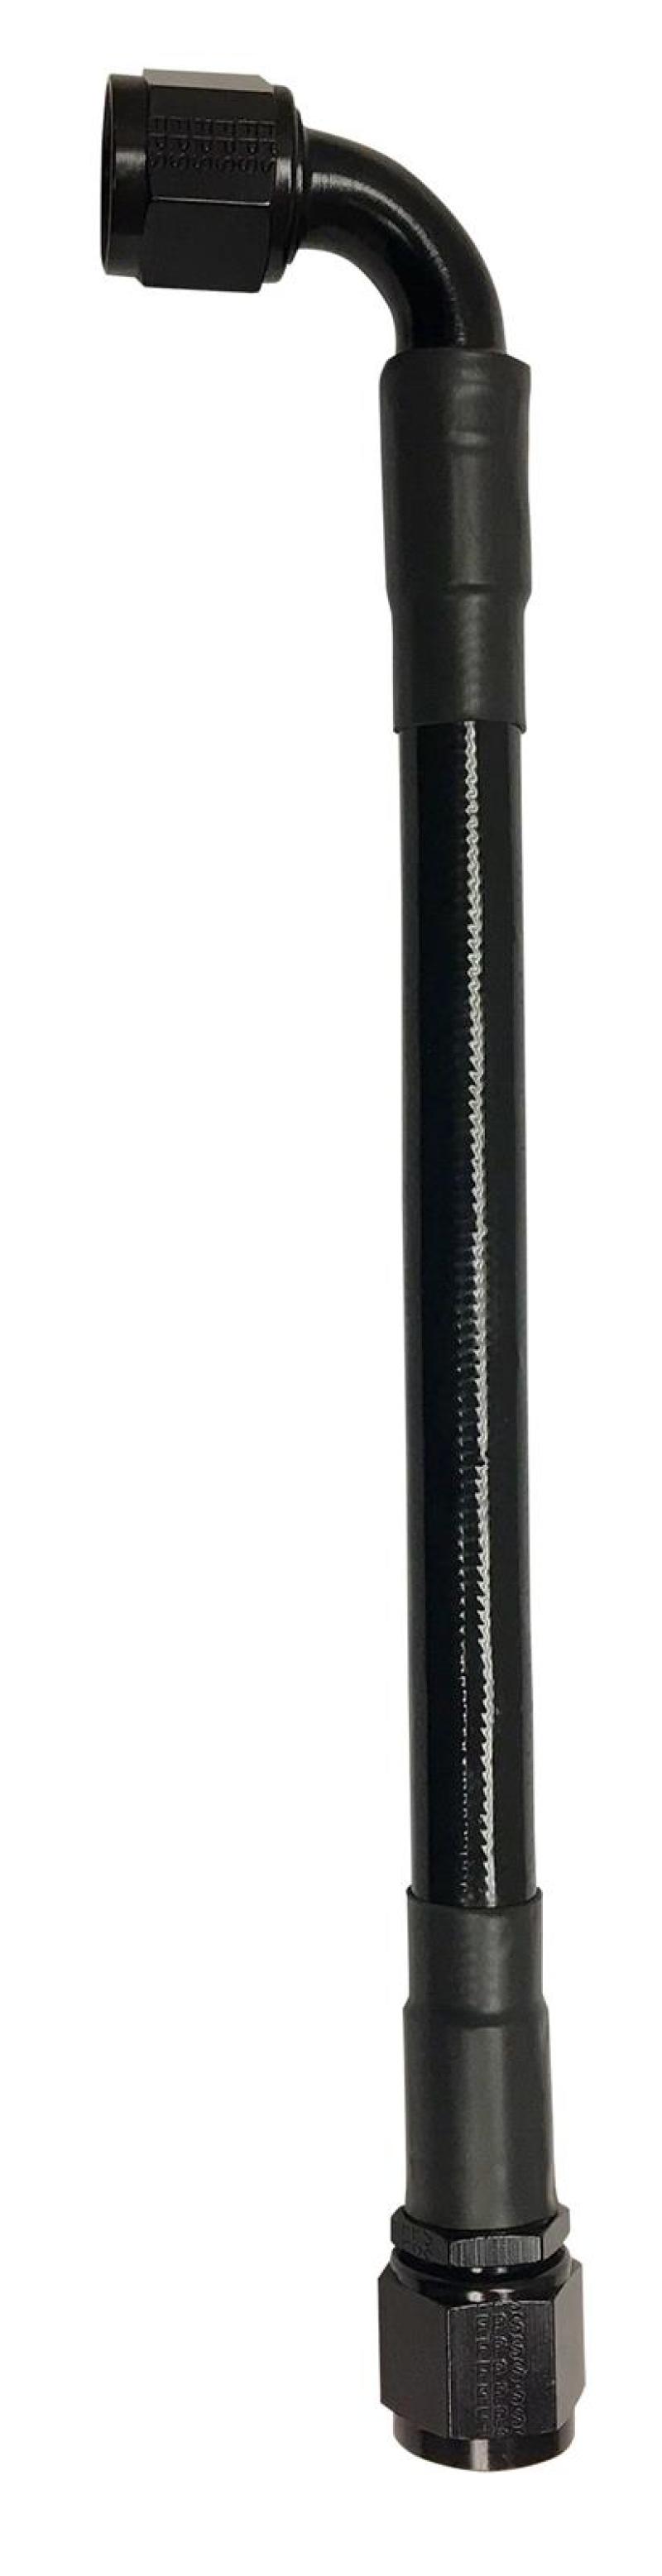 Fragola -10AN Ext Black PTFE Hose Assembly Straight x 90 Degree 16in - 6029-1-2-16BL